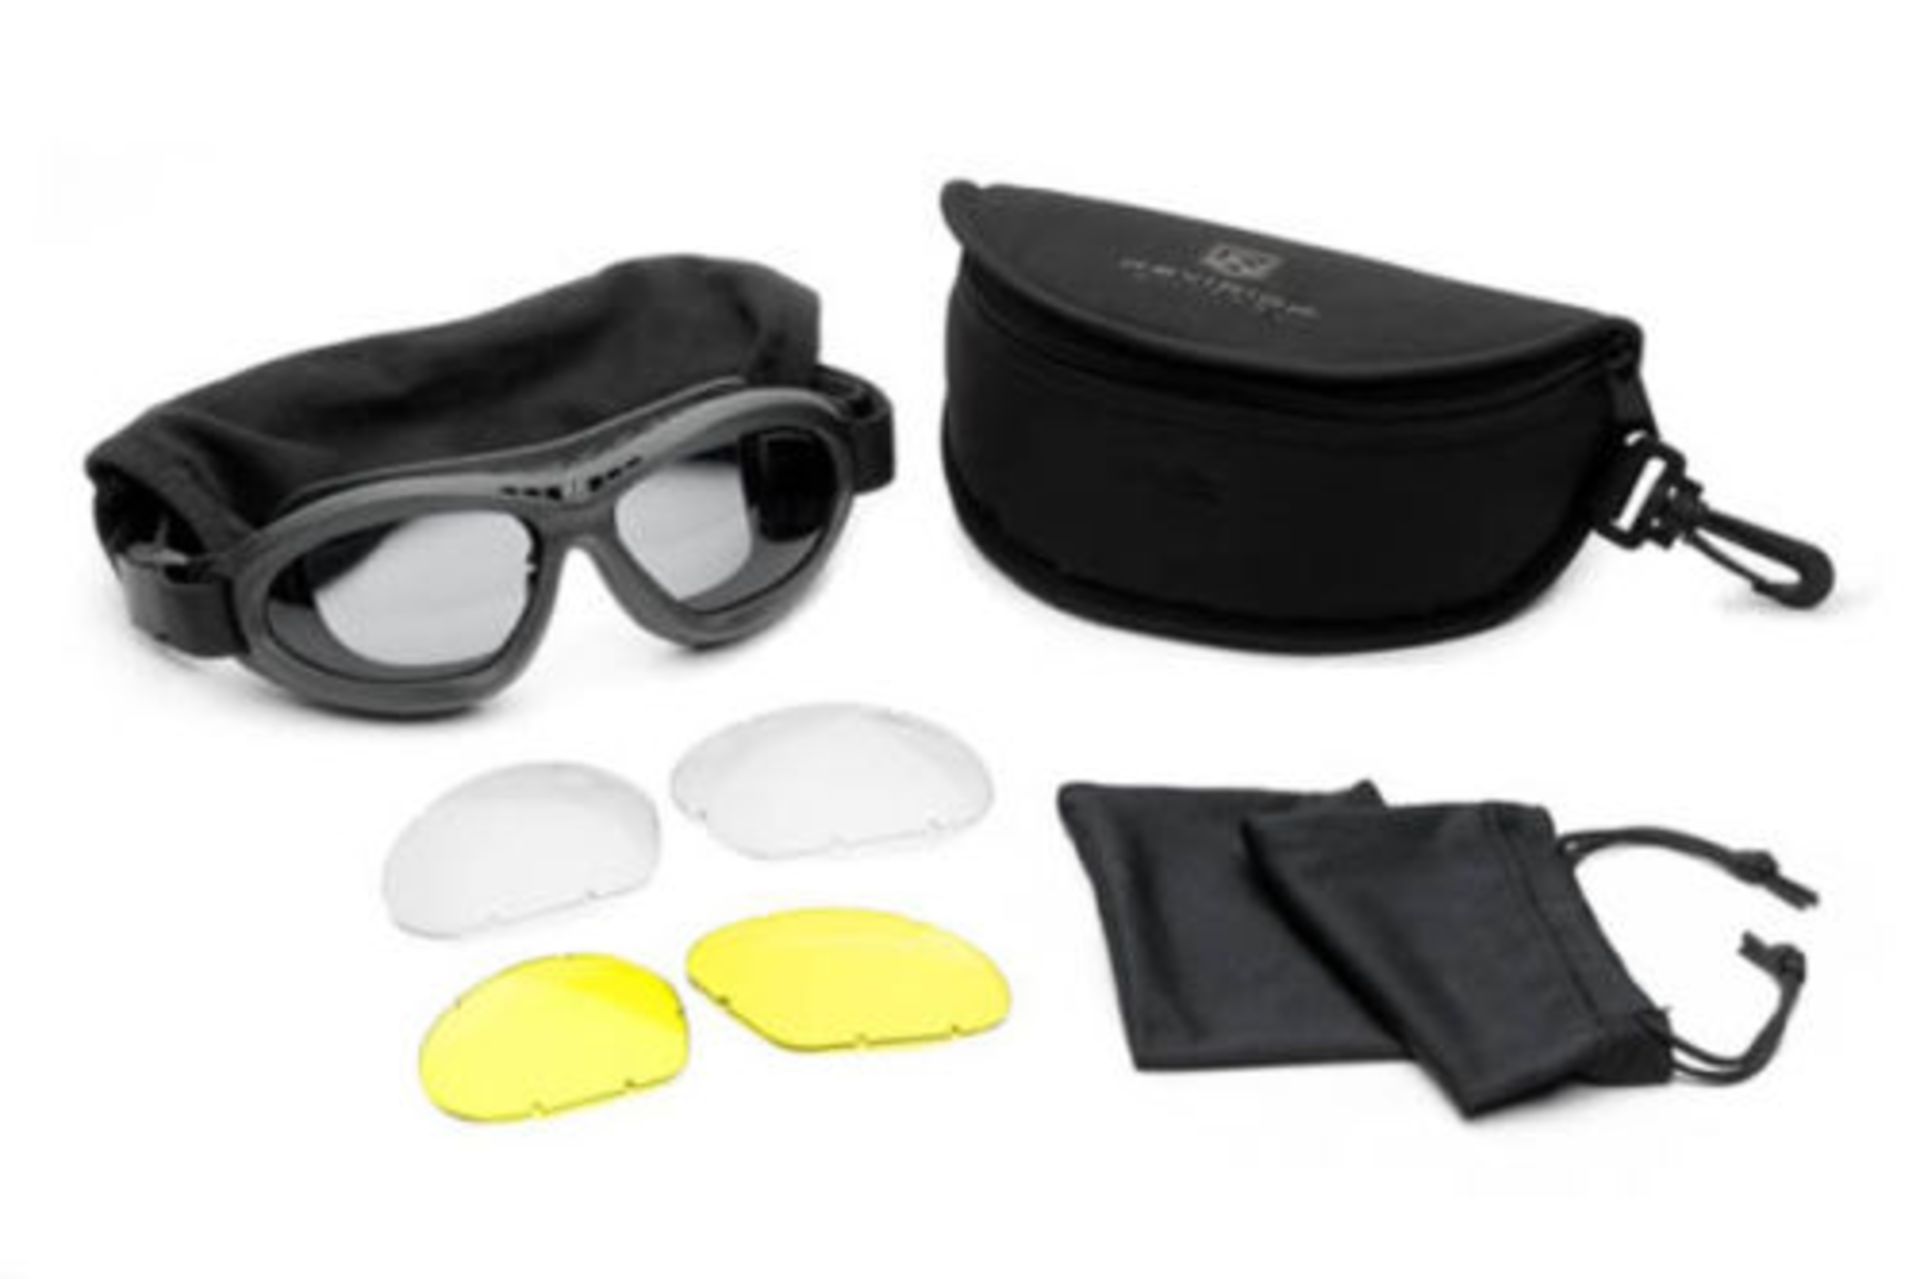 Pack of 5 - Revision Bullet Ant Goggles - Brand New